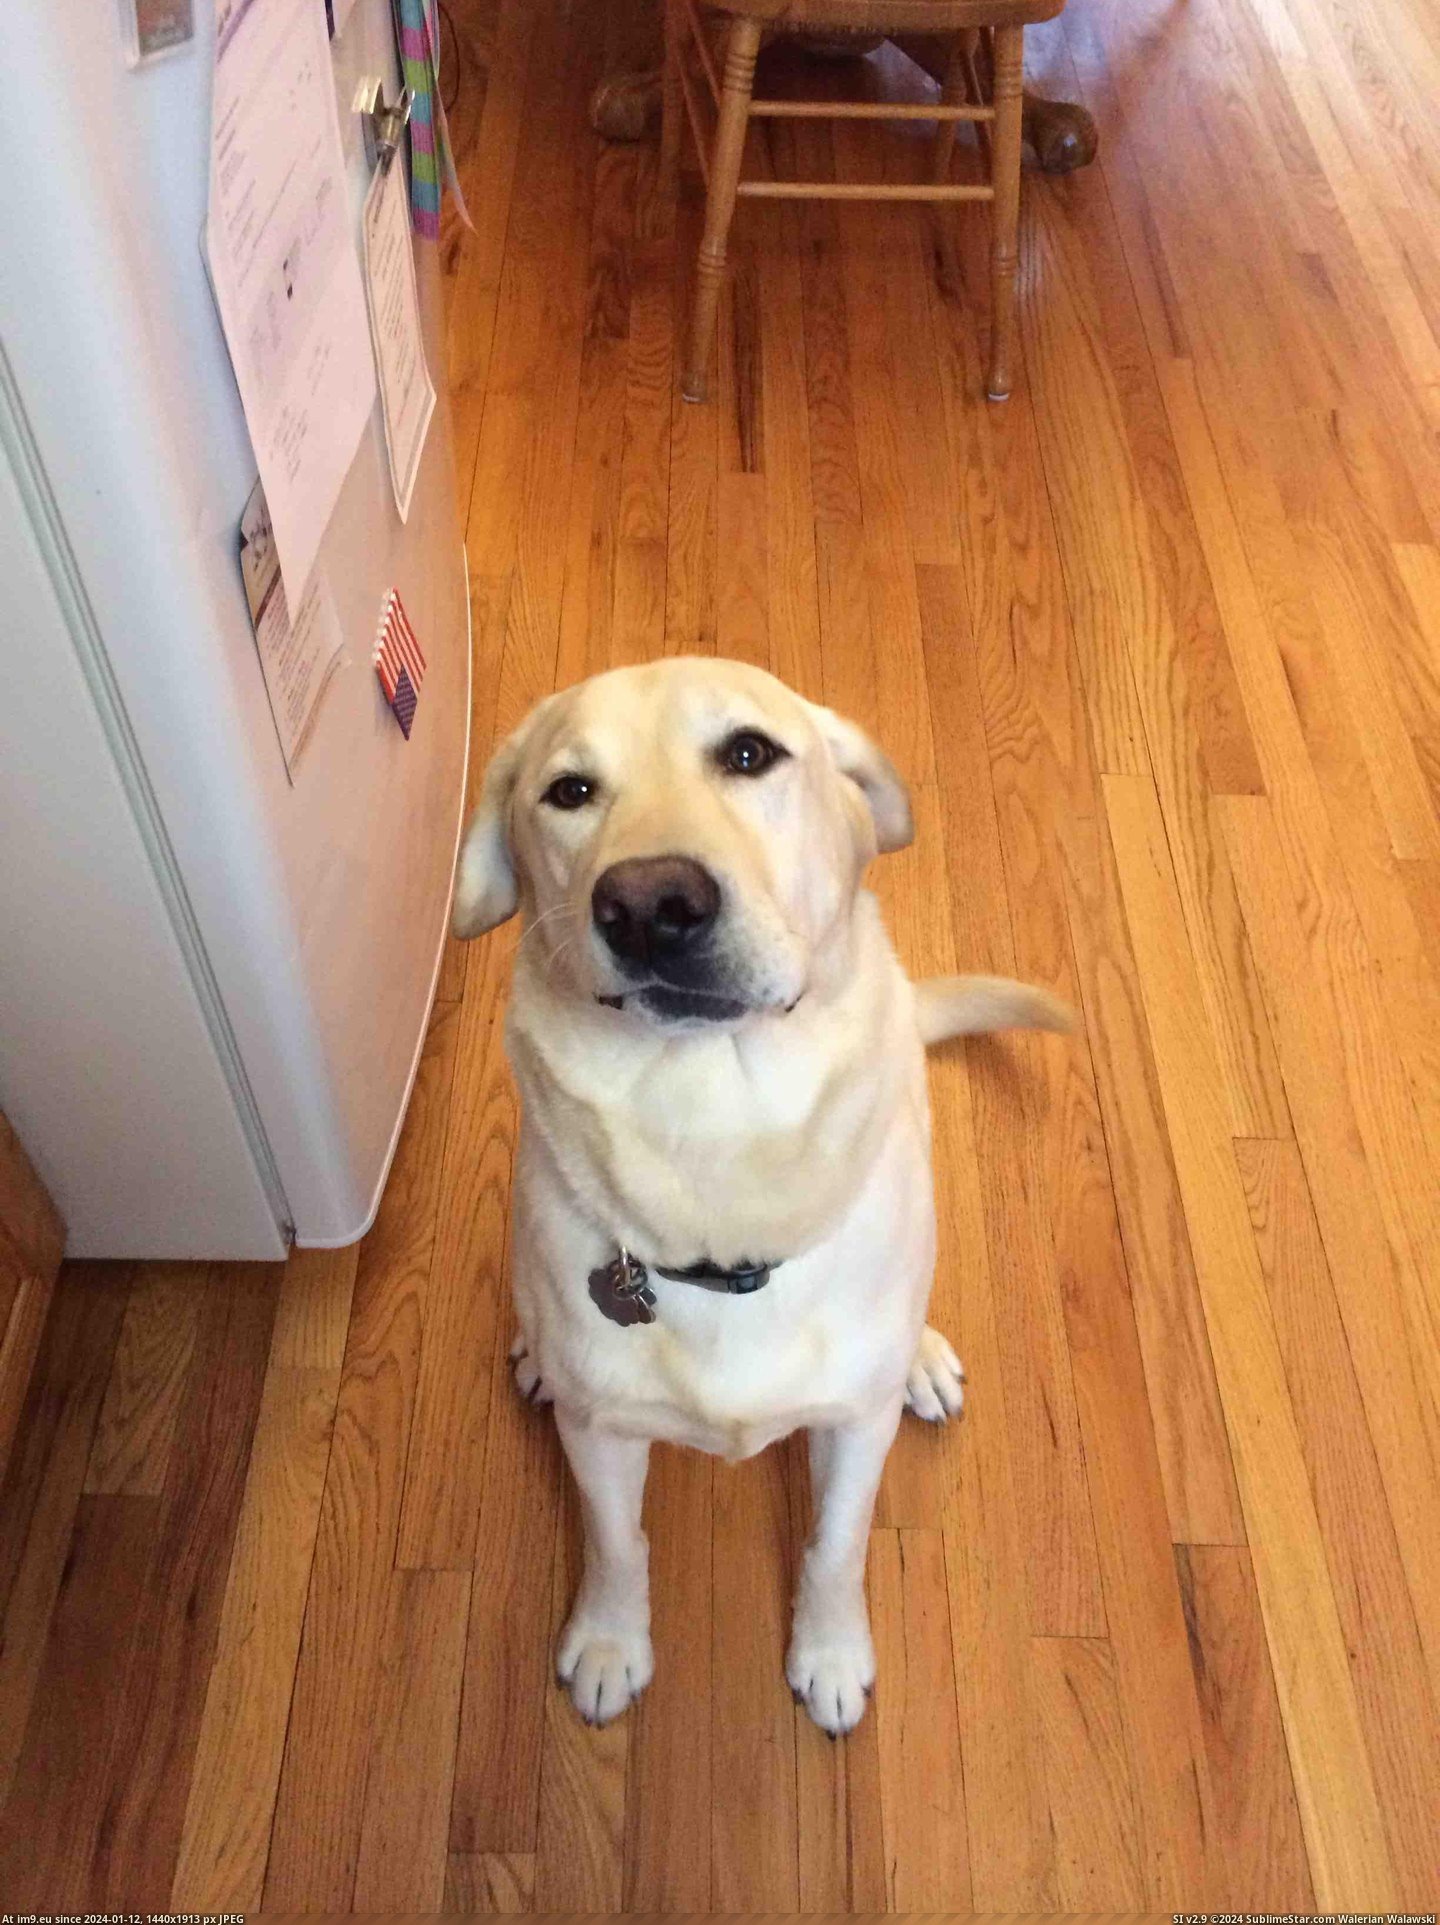 #Was #Face #Blue #Lab #Crooked #Feeling #Born #Yellow [Aww] My yellow lab was born with a crooked face. Seeing it when I'm feeling blue makes my days 100x better Pic. (Изображение из альбом My r/AWW favs))